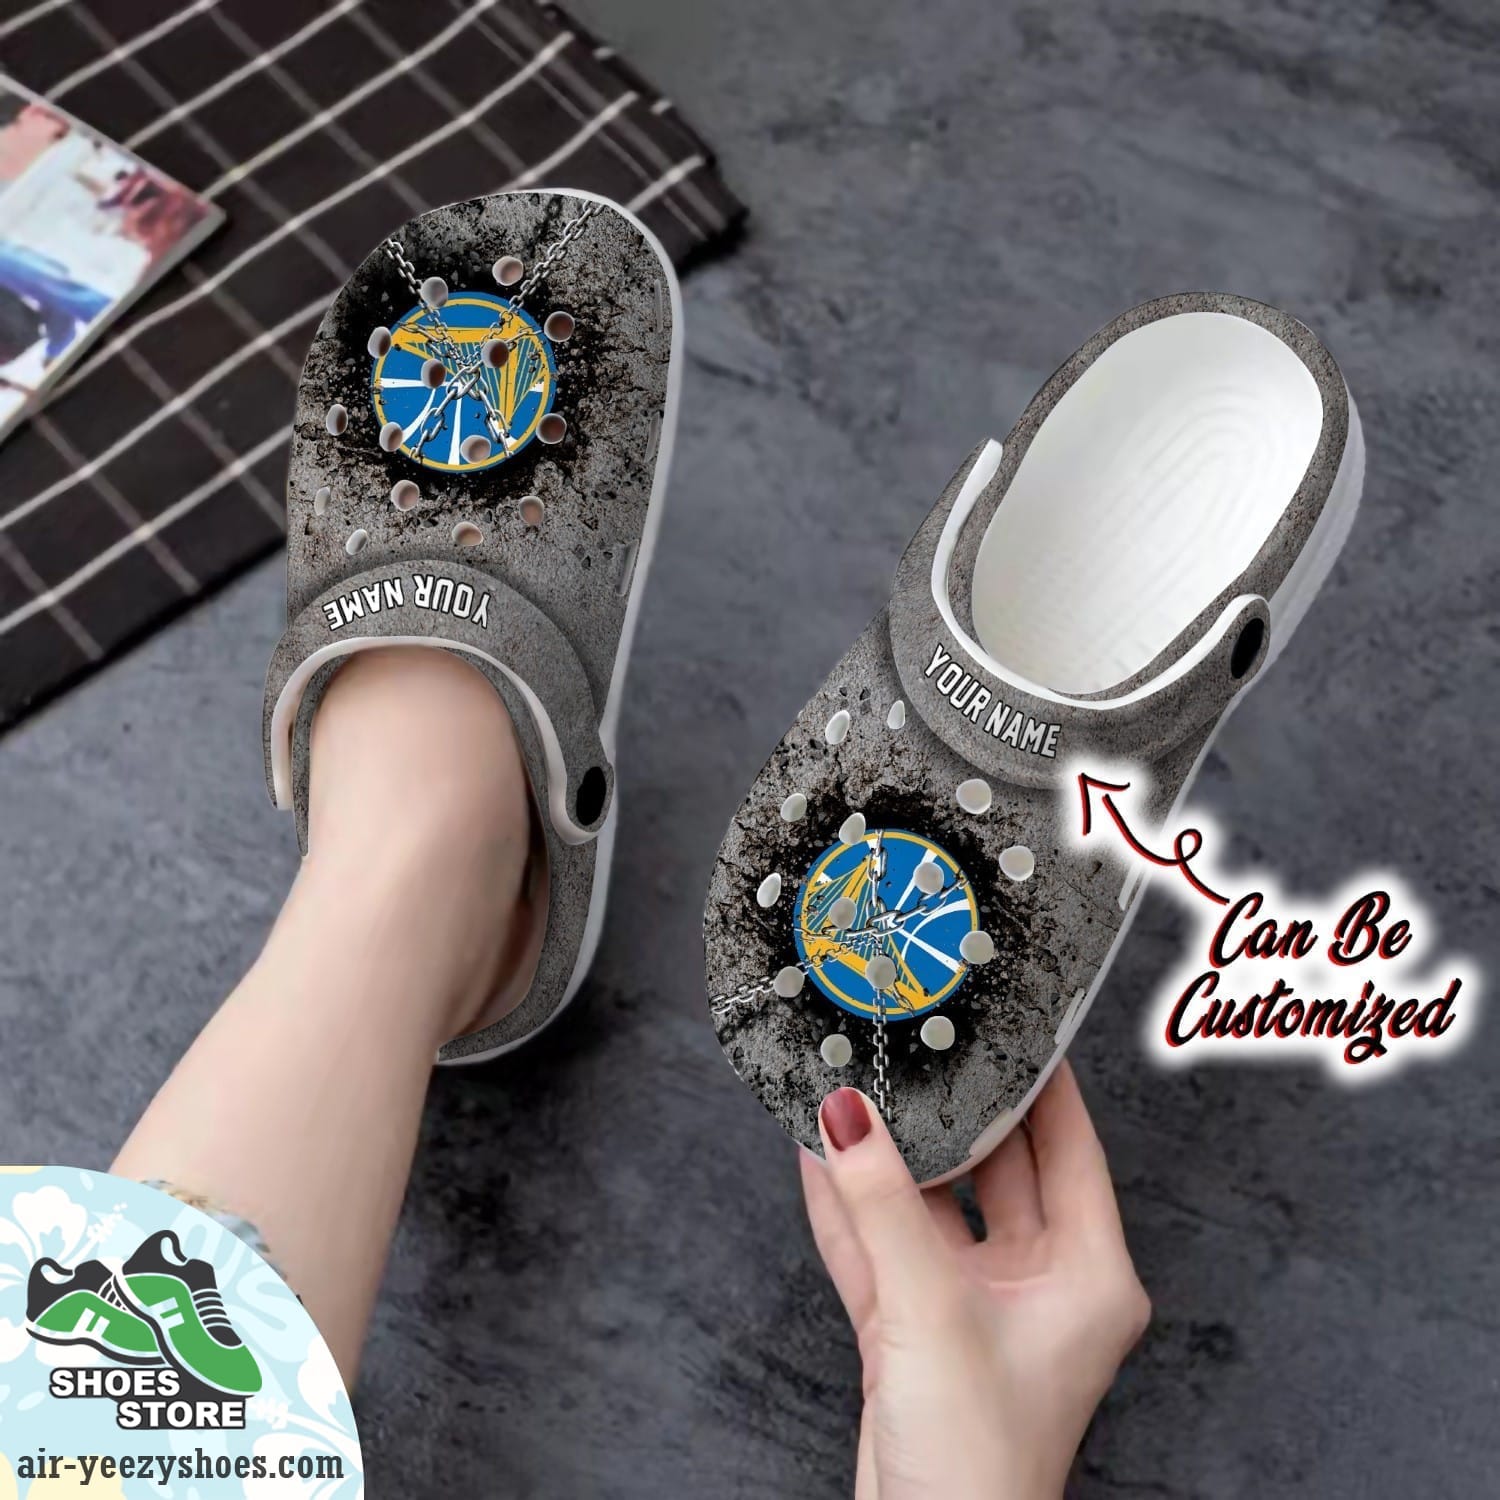 Golden State Warriors Personalized Chain Breaking Wall Clog Shoes, Basketball Crocs